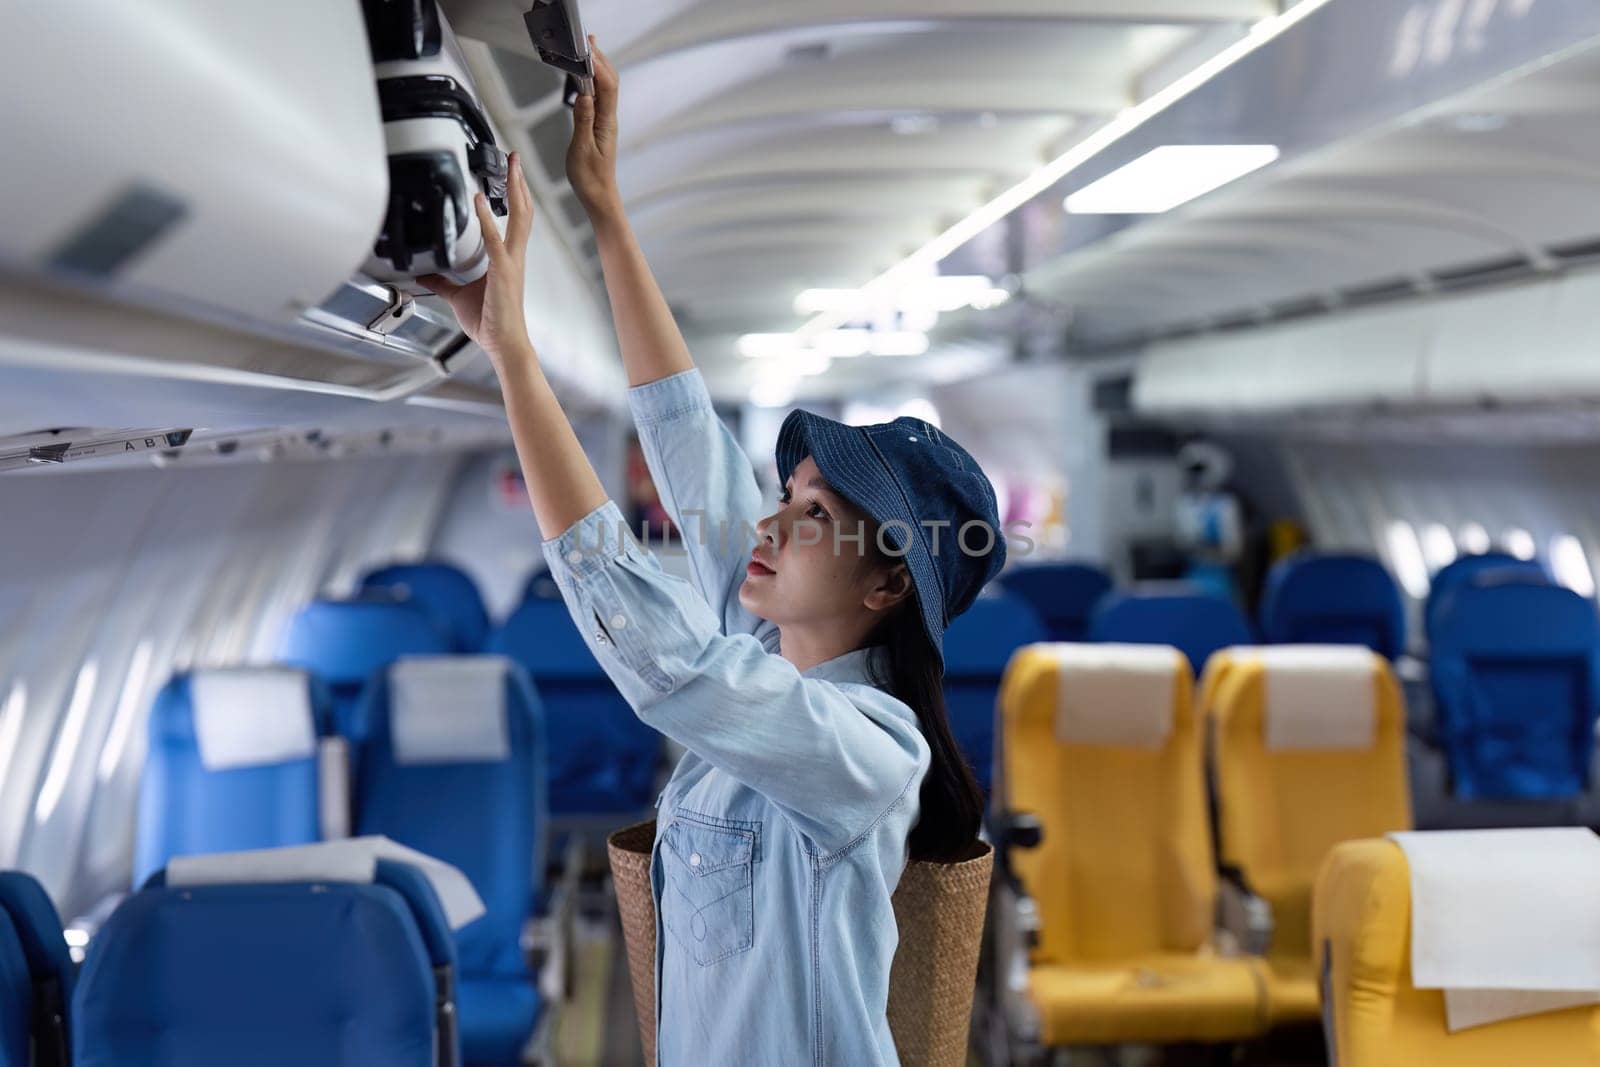 female passenger keep bag in the compartment above the seat in the plane. travel concept by itchaznong